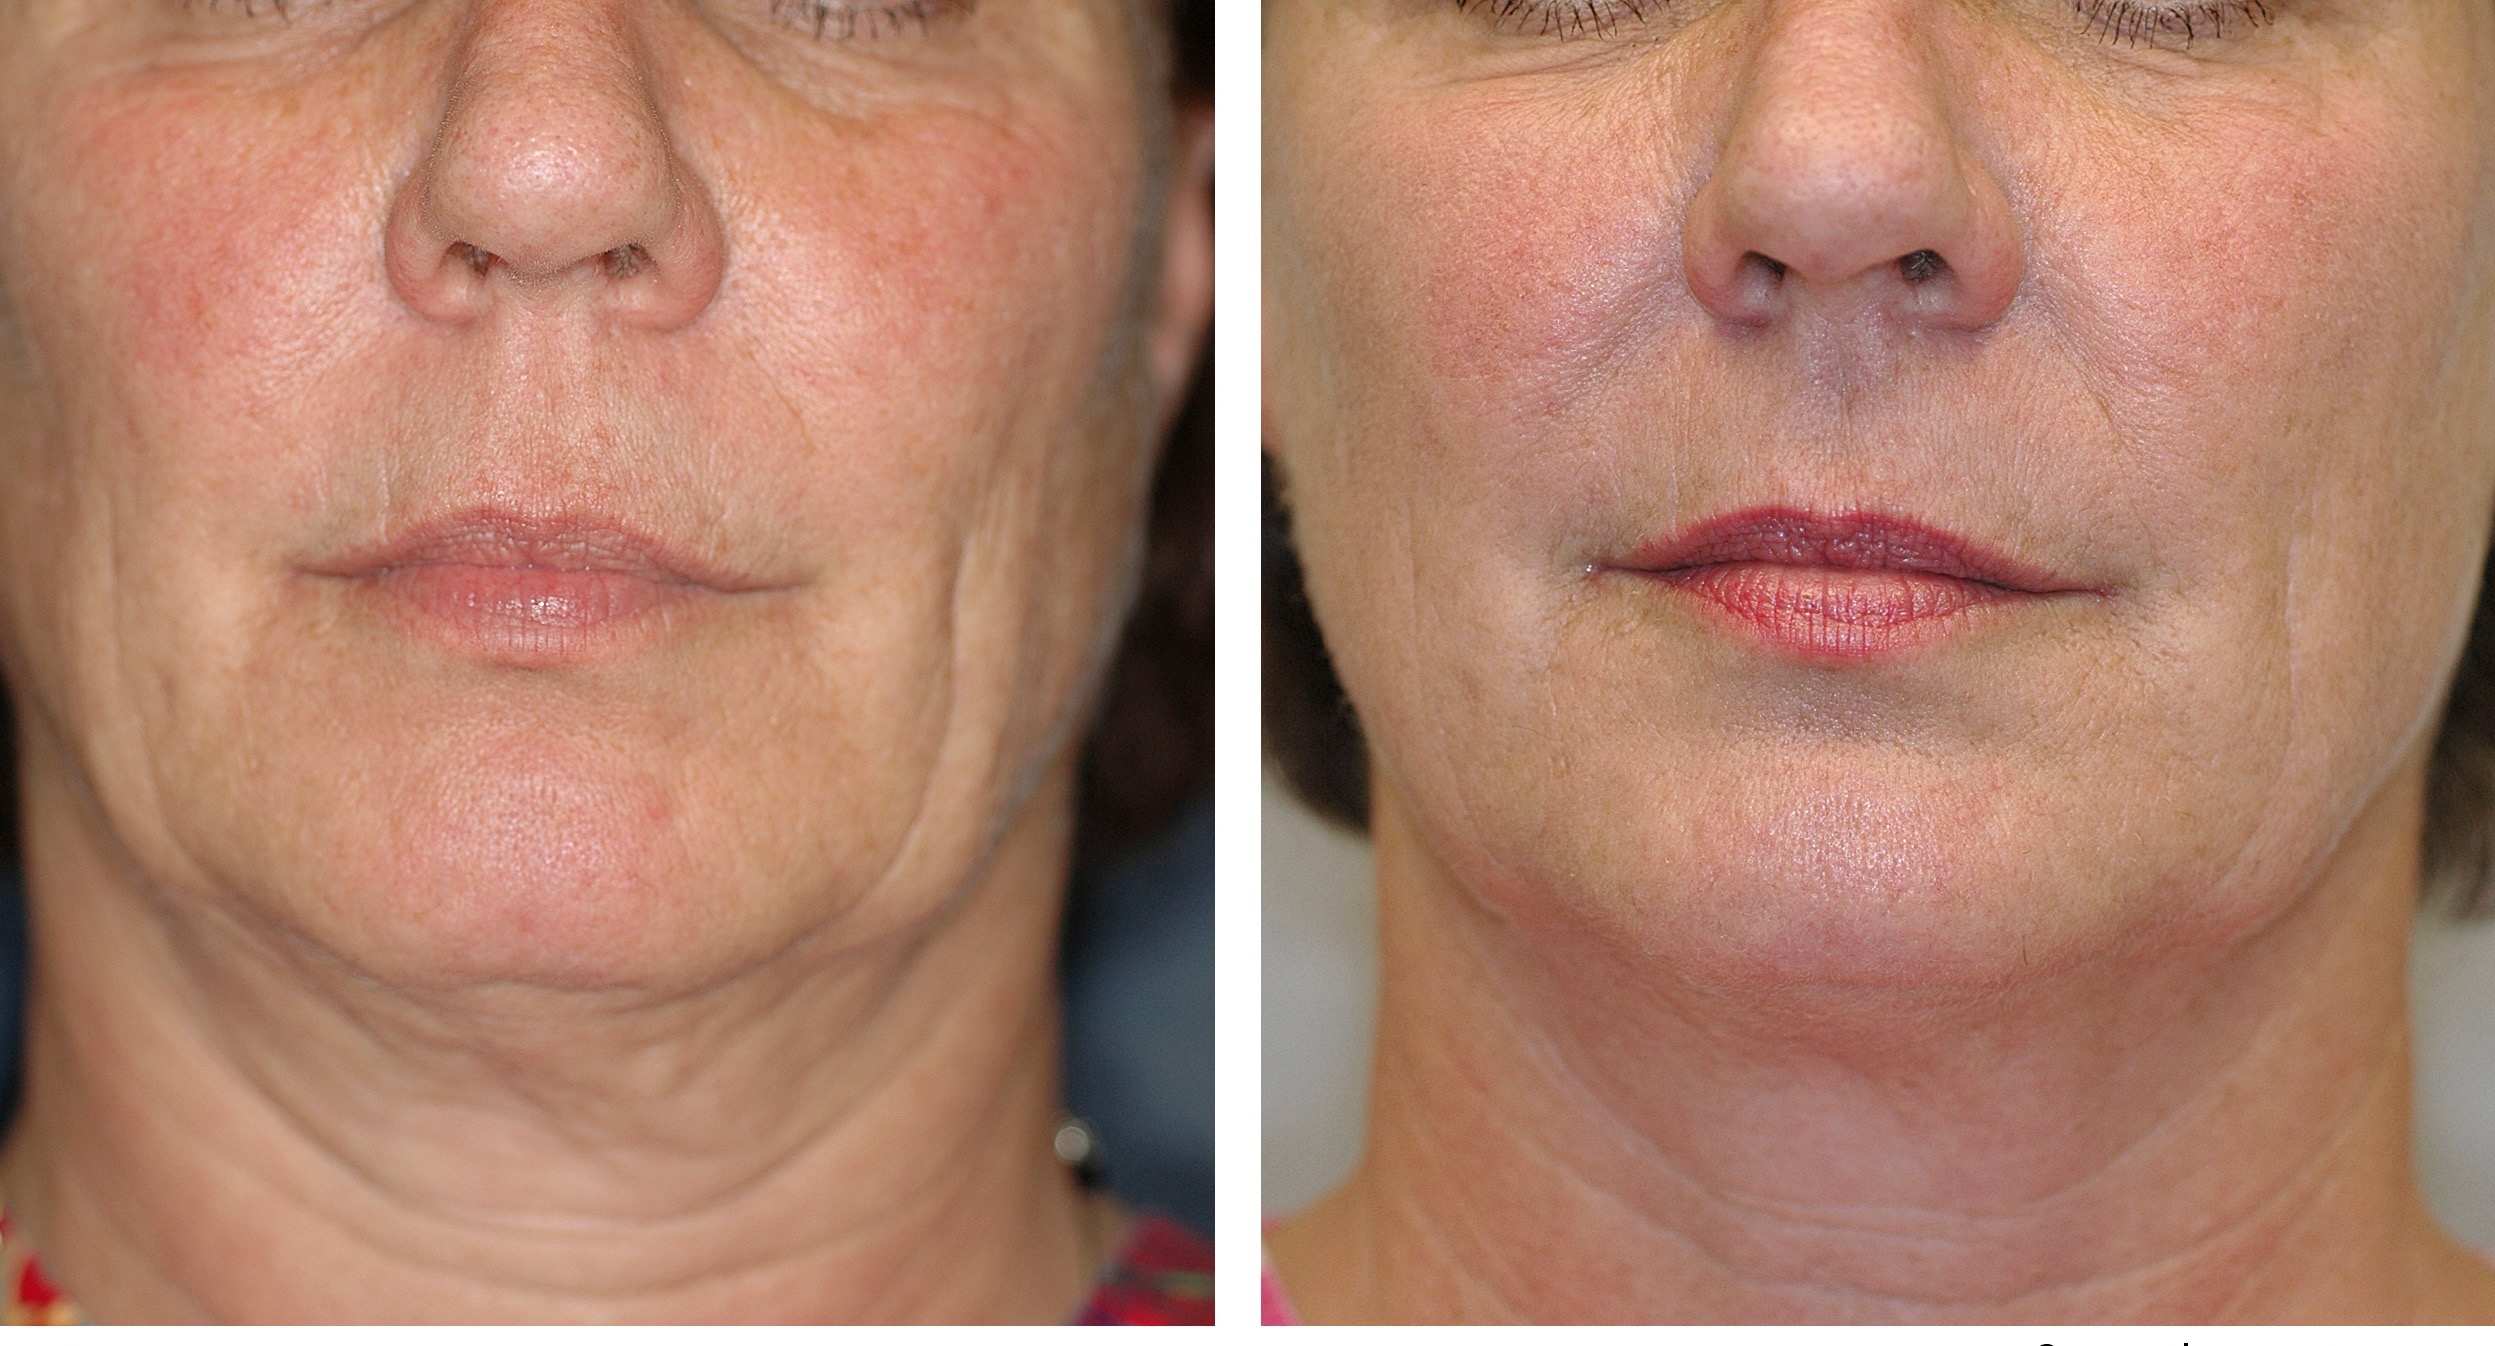 Thermage For Non Surgical Face Lifts And To Tighten Loose Skin Was The No 1 Choice To Tighten